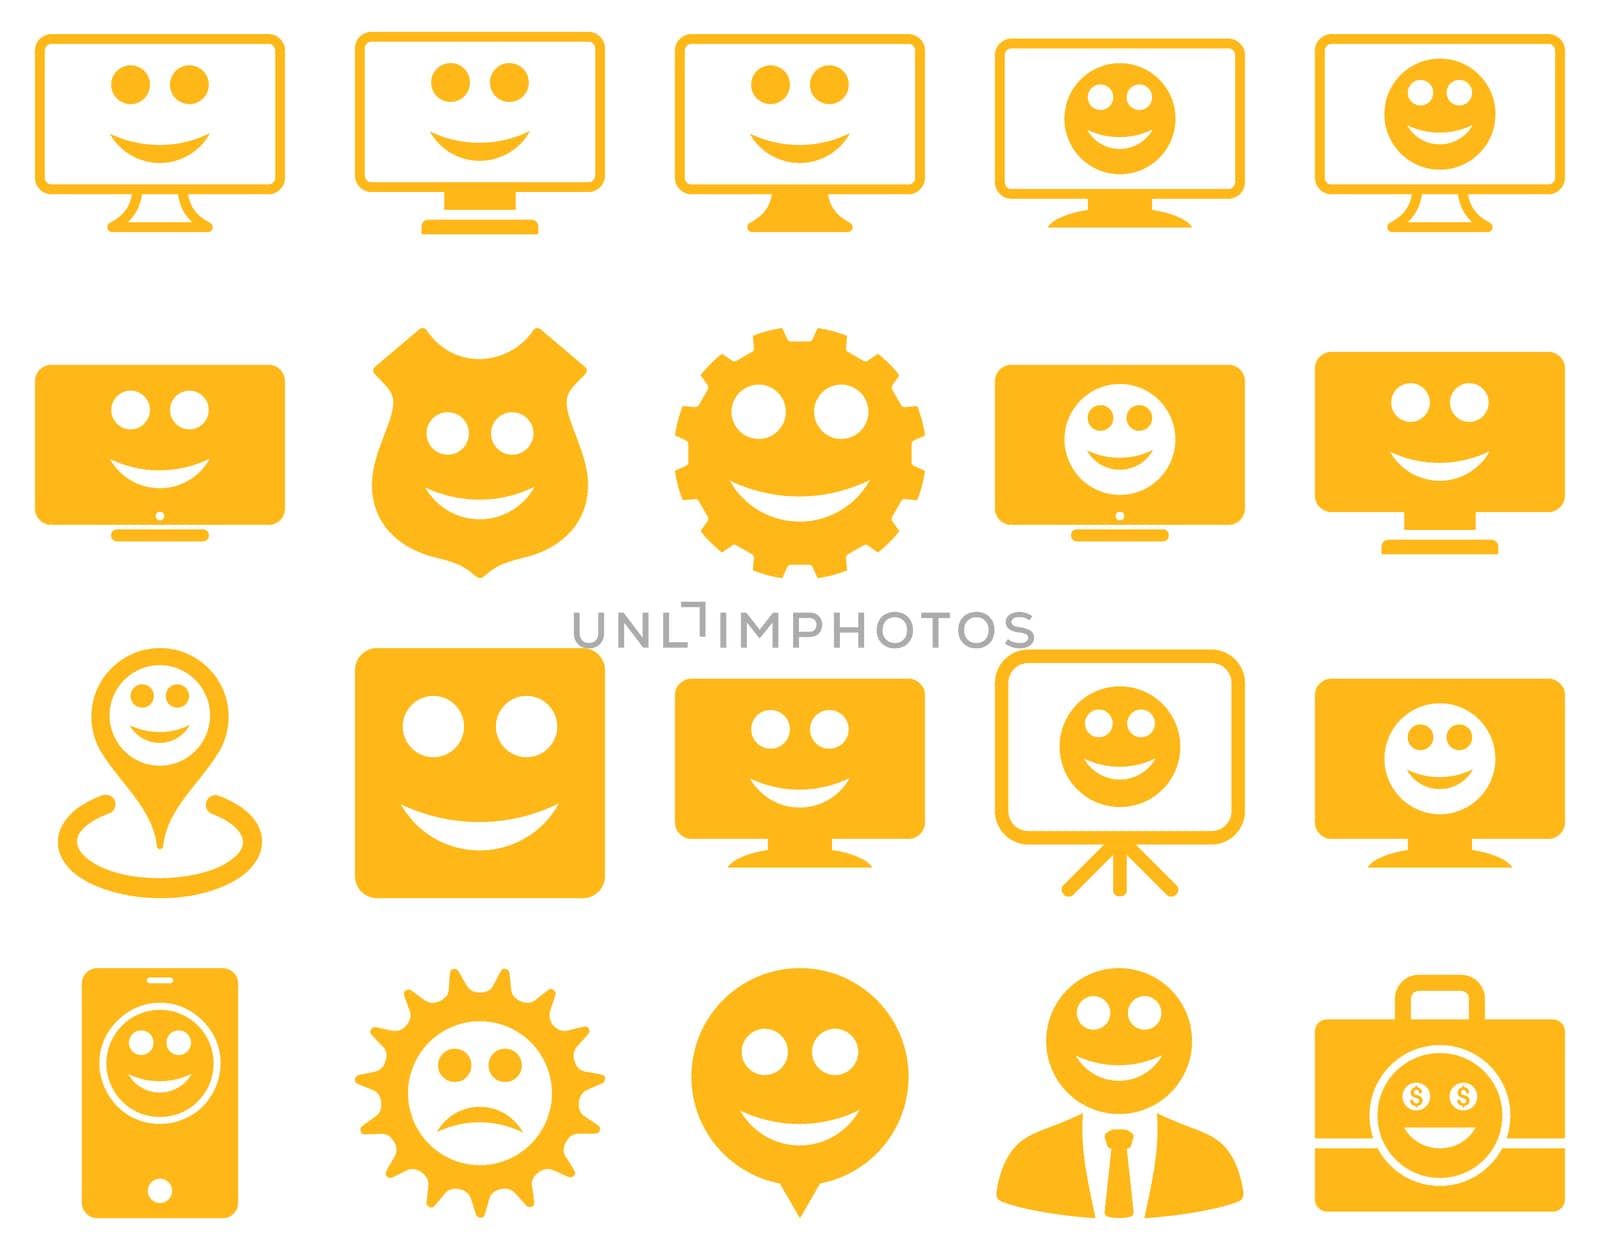 Tools, gears, smiles, dilspays icons. Glyph set style is flat images, yellow symbols, isolated on a white background.